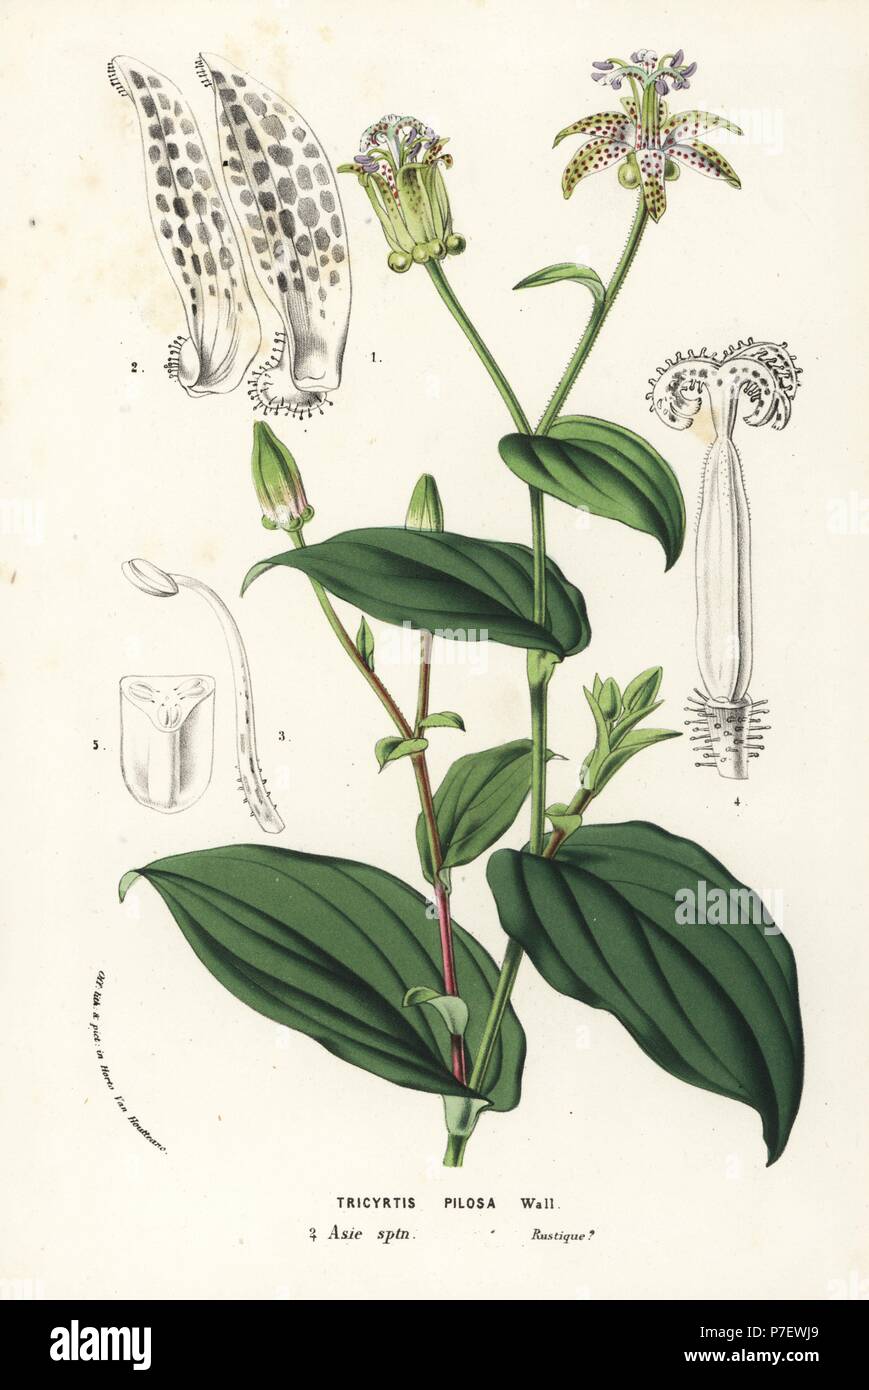 Toad lily, Tricyrtis maculata (Tricyrtis pilosa). Handcoloured lithograph from Louis van Houtte and Charles Lemaire's Flowers of the Gardens and Hothouses of Europe, Flore des Serres et des Jardins de l'Europe, Ghent, Belgium, 1857. Stock Photo